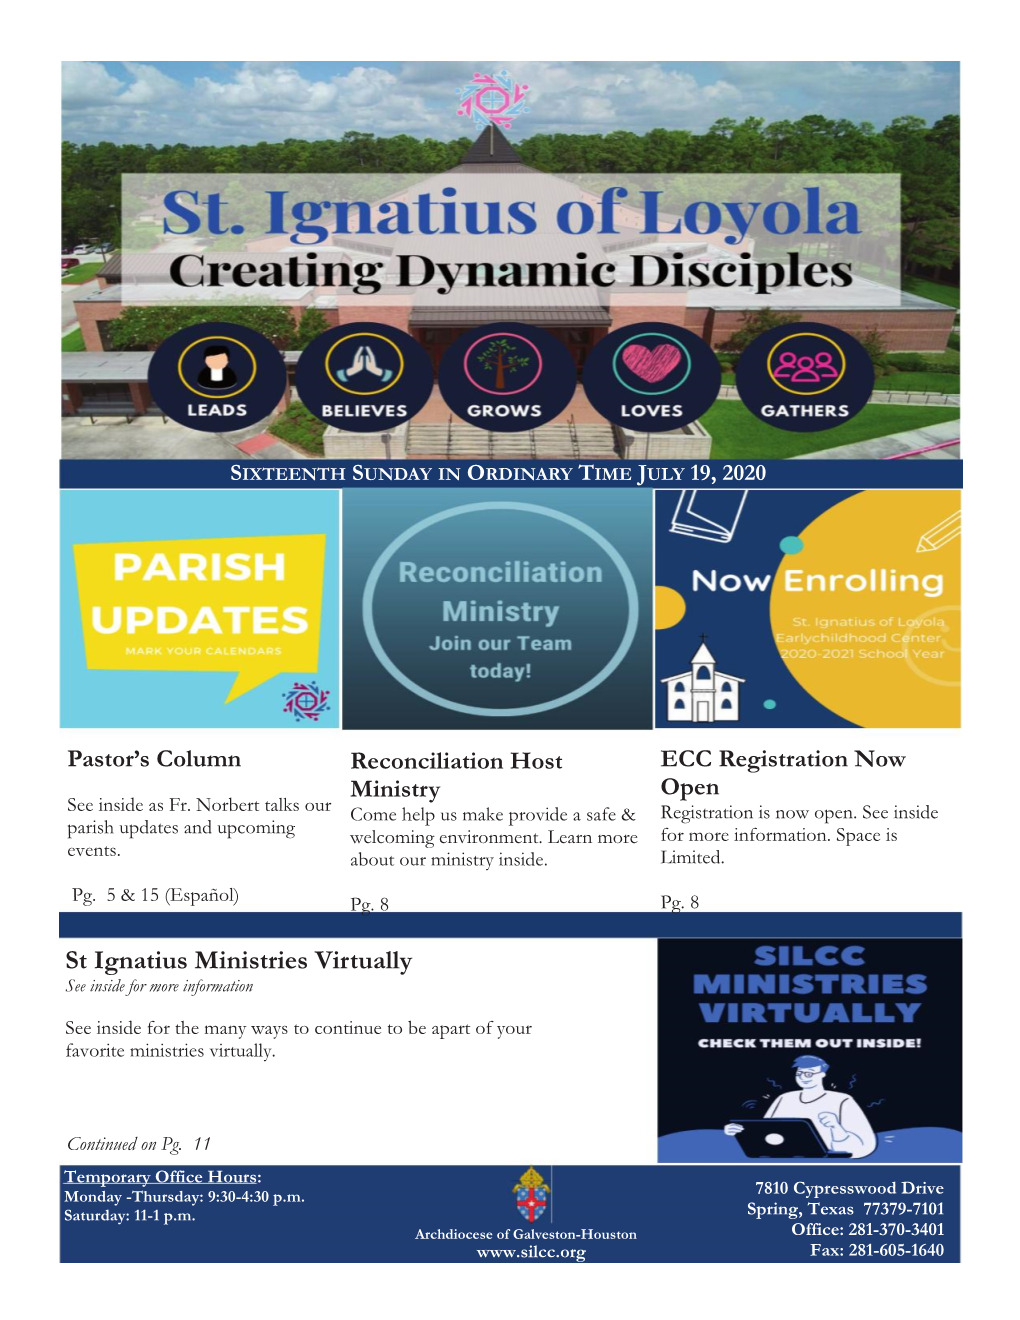 St Ignatius Ministries Virtually See Inside for More Information